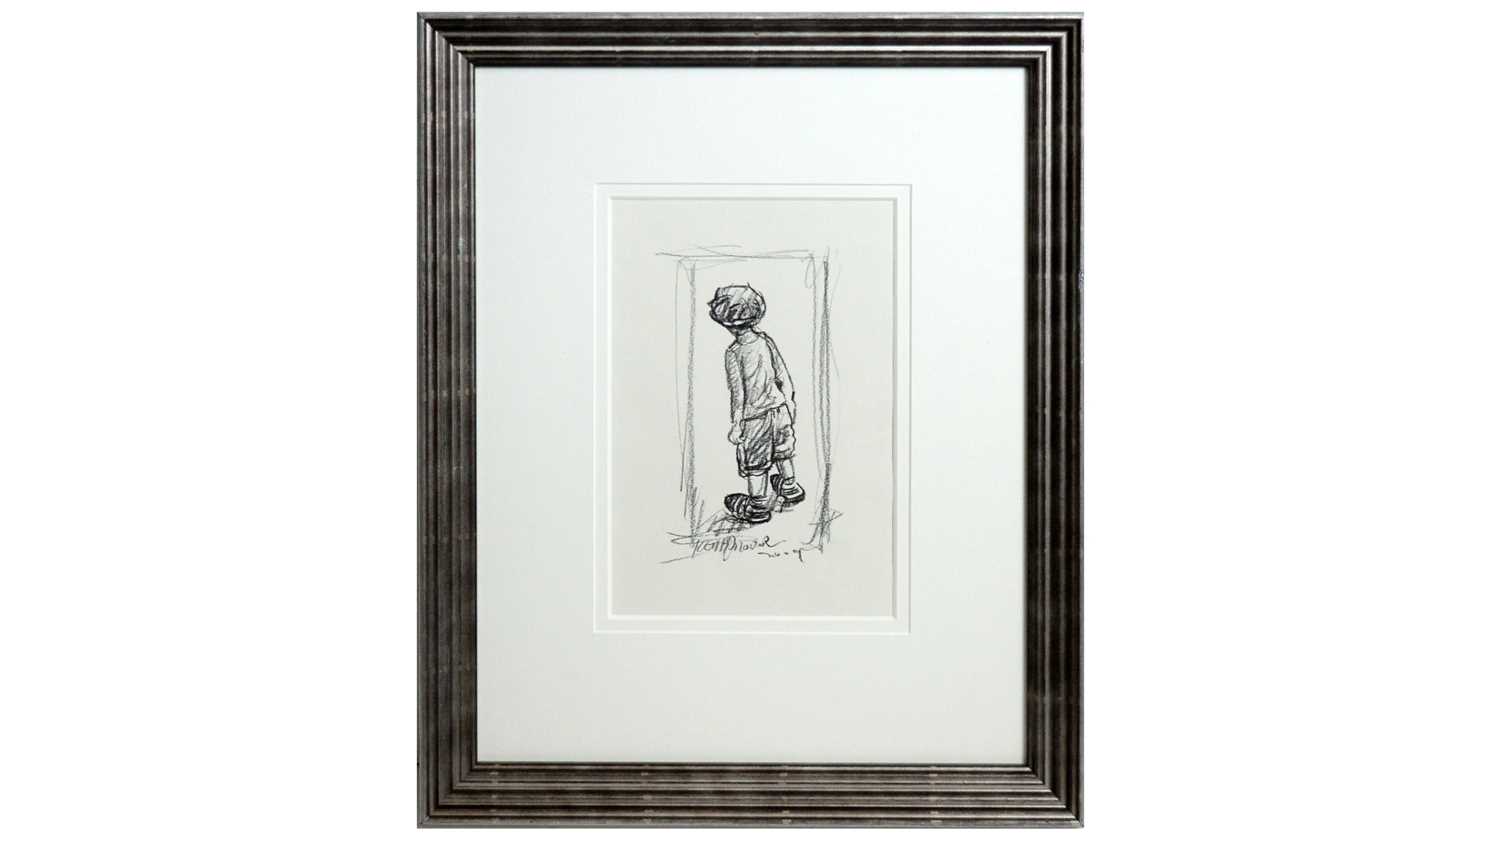 Lot 553 - Keith Proctor - Peekaboo | charcoal on paper